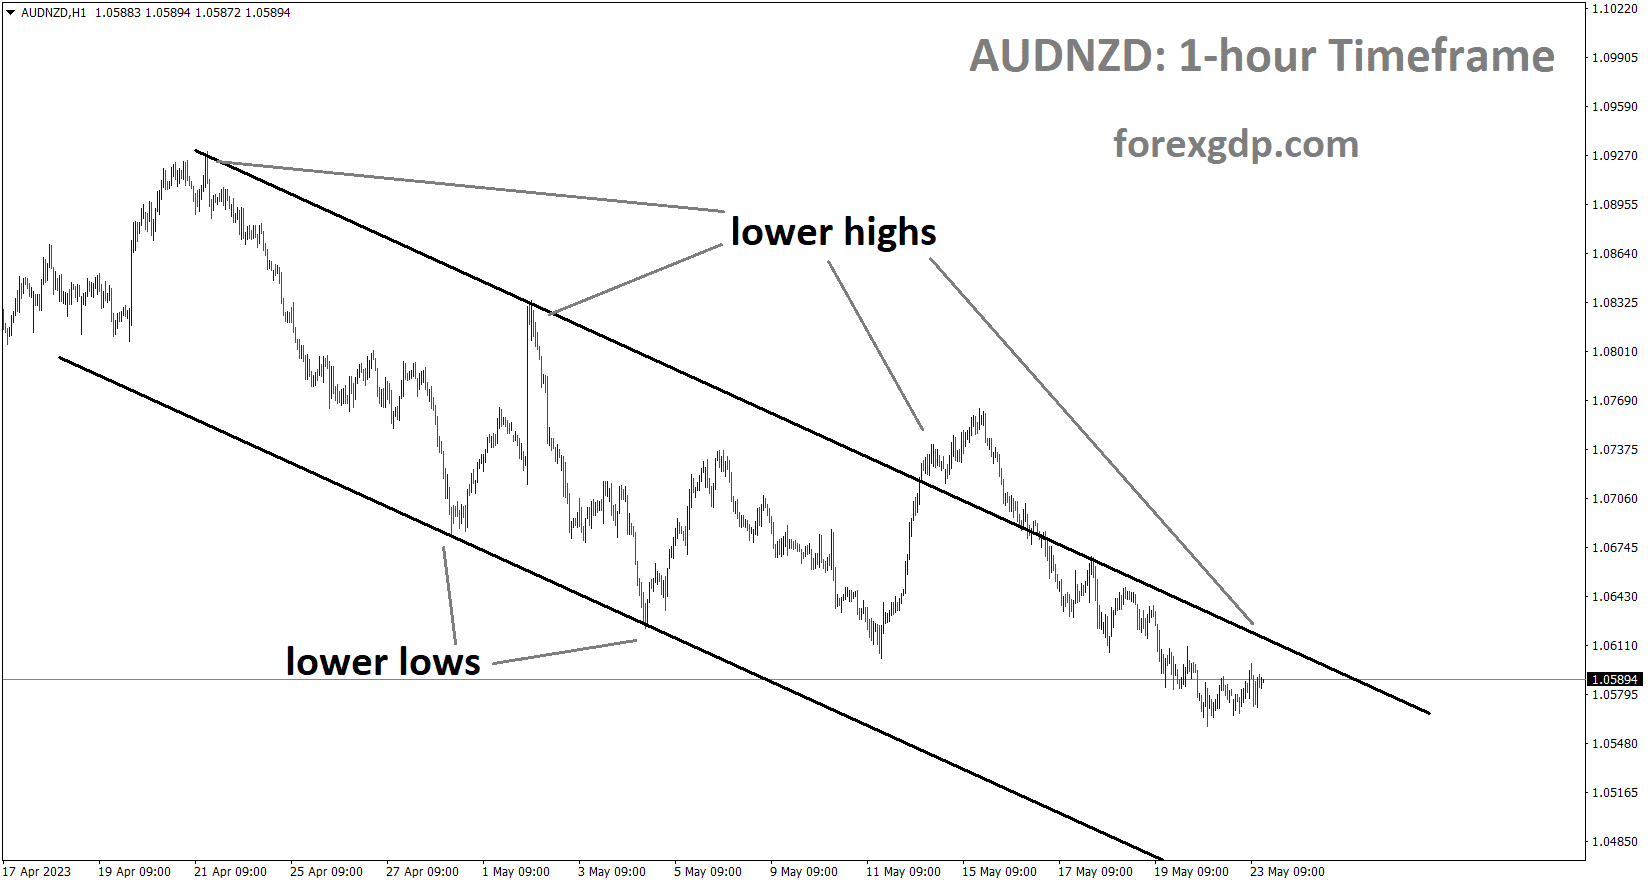 AUDNZD H1 TF analysis Market is moving in the Descending channel and the market has fallen from the lower high area of the channel